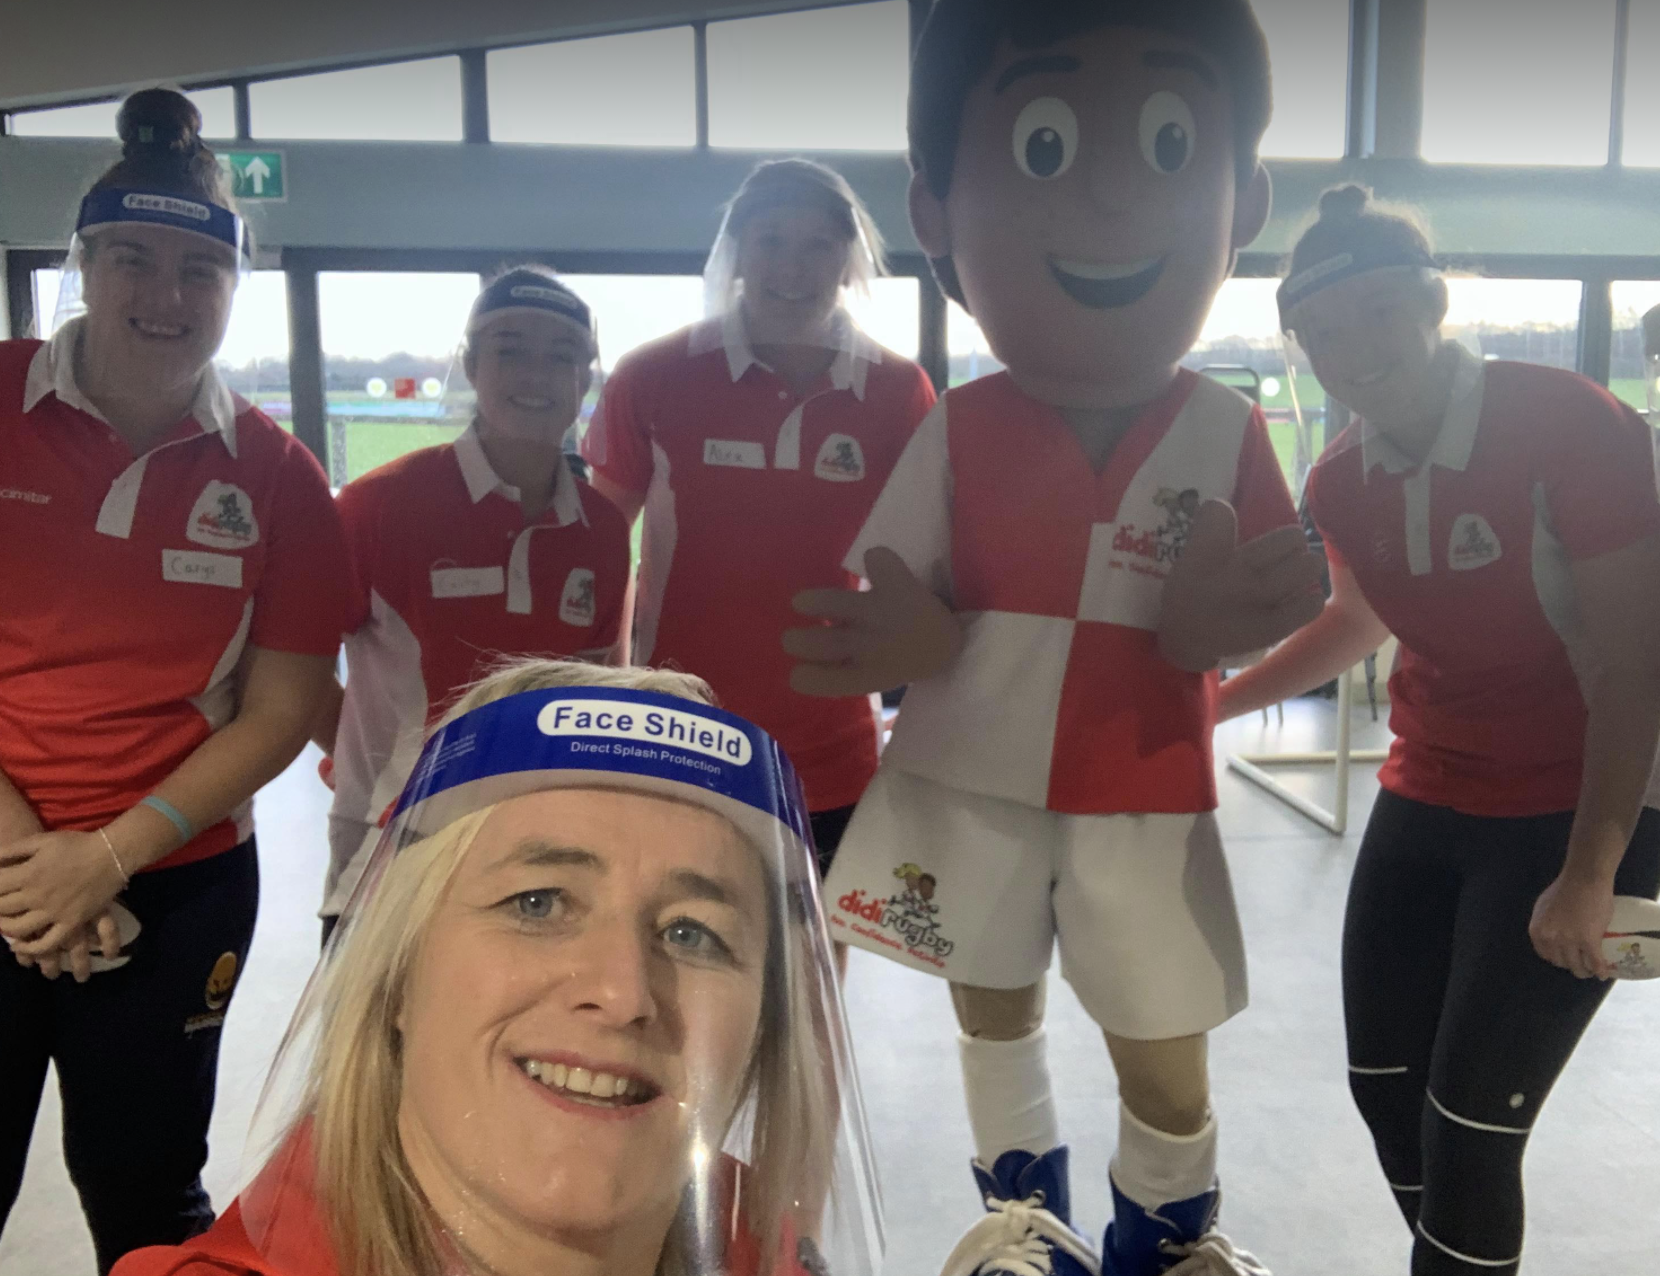 Vicky Macqueen and her team at the launch of didi rugby Worcester with PPE on